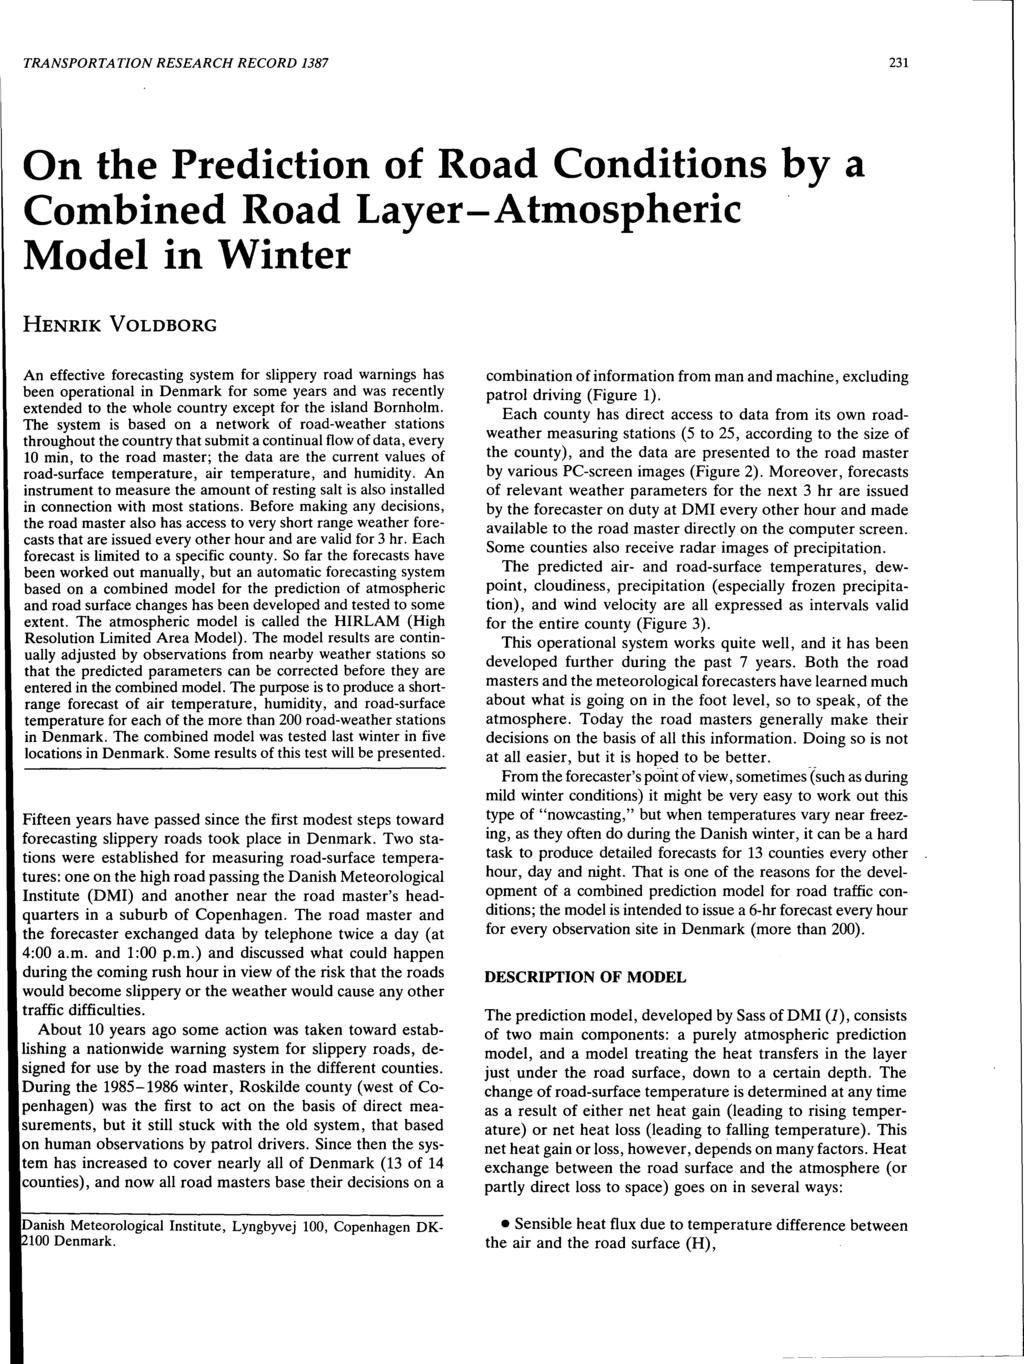 TRANSPORTATION RESEARCH RECORD 1387 231 On the Prediction of Road Conditions by a Combined Road Layer-Atmospheric Model in Winter HENRIK VOLDBORG An effective forecasting system for slippery road